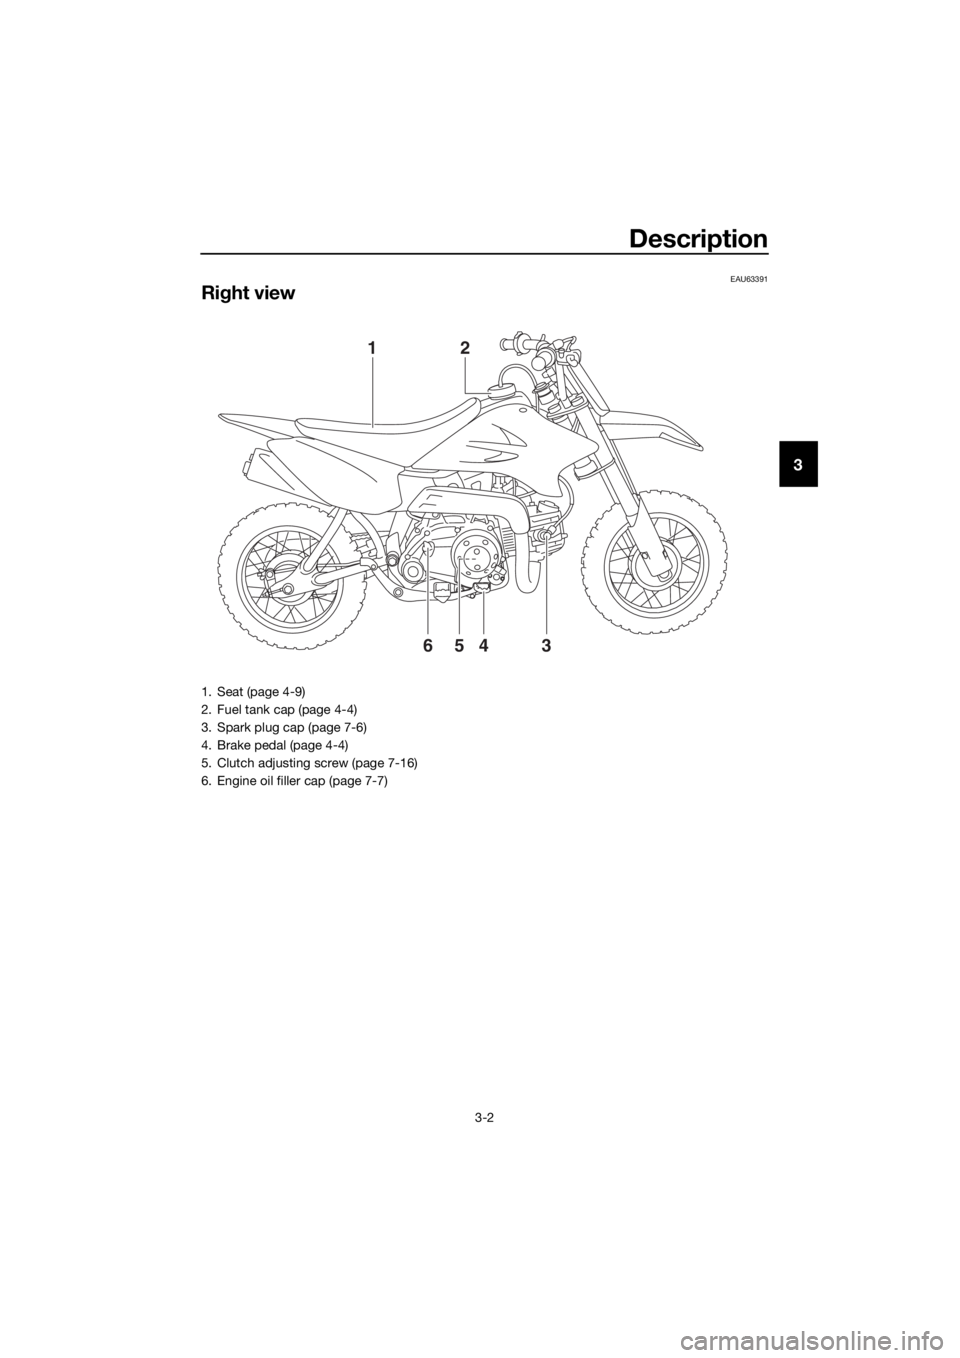 YAMAHA TT-R50E 2016  Owners Manual Description
3-2
3
EAU63391
Right view
4
65 3 2
1
1. Seat (page 4-9)
2. Fuel tank cap (page 4-4)
3. Spark plug cap (page 7-6)
4. Brake pedal (page 4-4)
5. Clutch adjusting screw (page 7-16)
6. Engine o